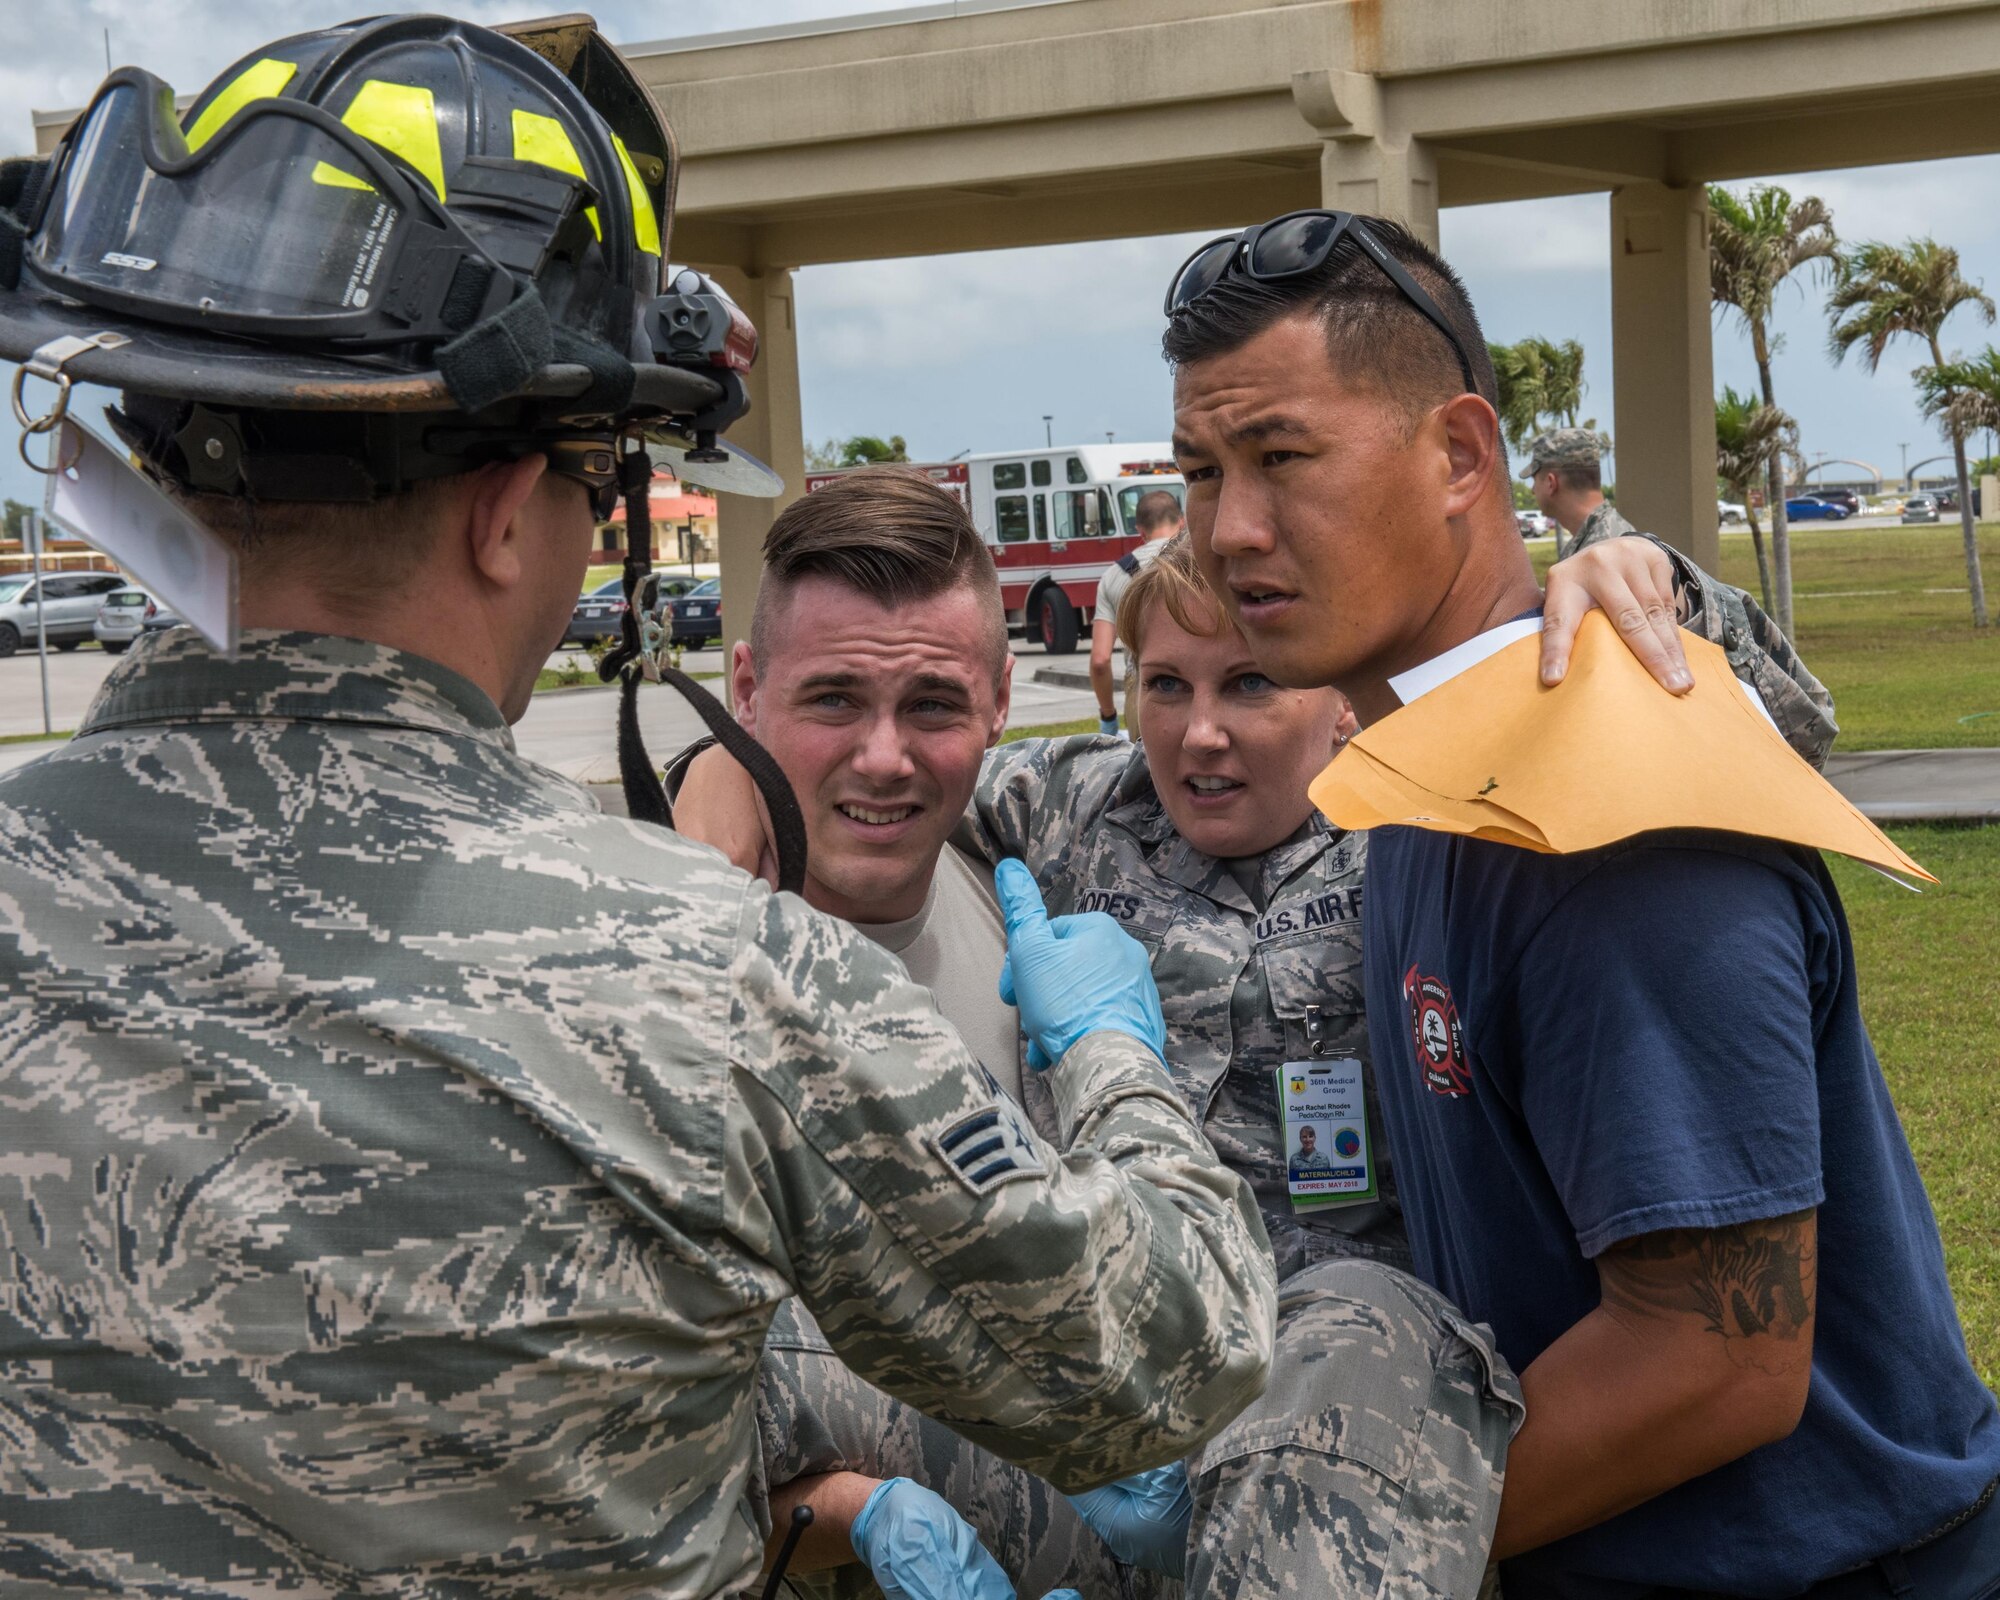 Emergency responders carry an Airman with a simulated injury to receive treatment during an emergency management exercise May 11, 2017, at Andersen Air Force Base, Guam. The exercise tested capabilities of emergency responders and support agencies. (U.S. Air Force photo by Airman 1st Class Jacob Skovo)